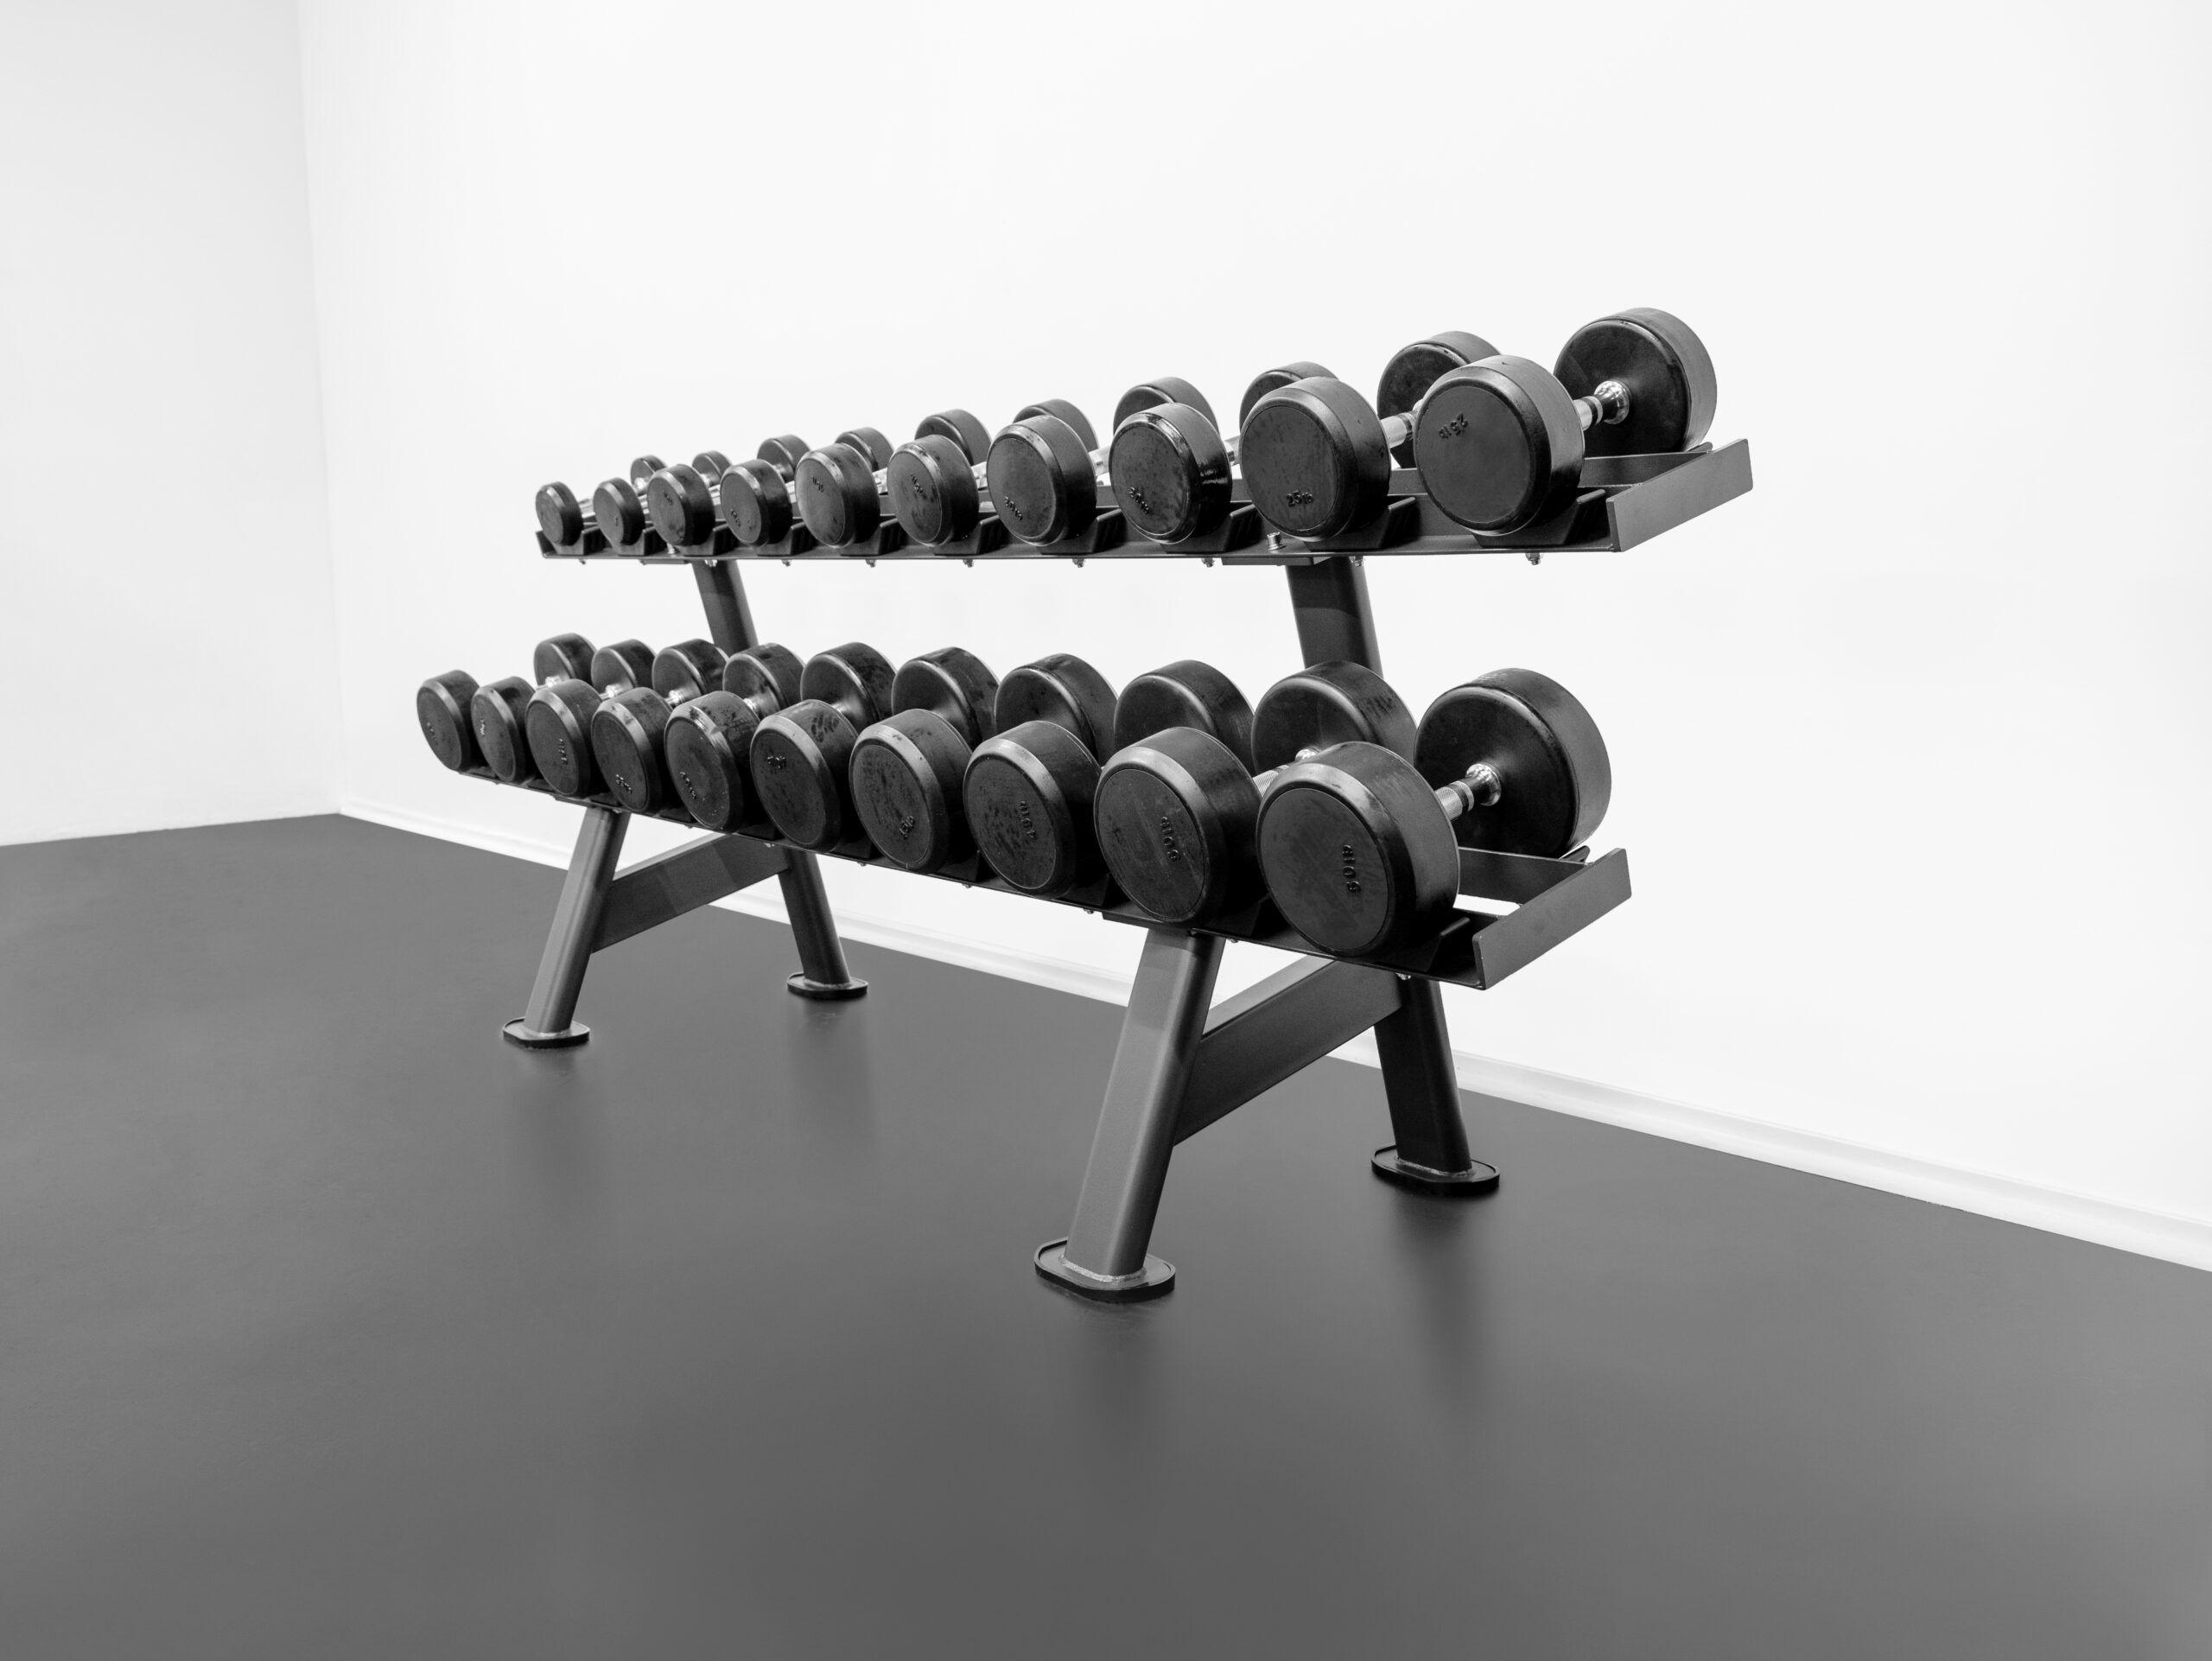 Total of 10 pairs of dumbbells (5, 10, 15, 20, 25, 30, 35, 40, 45, 50 lbs.)